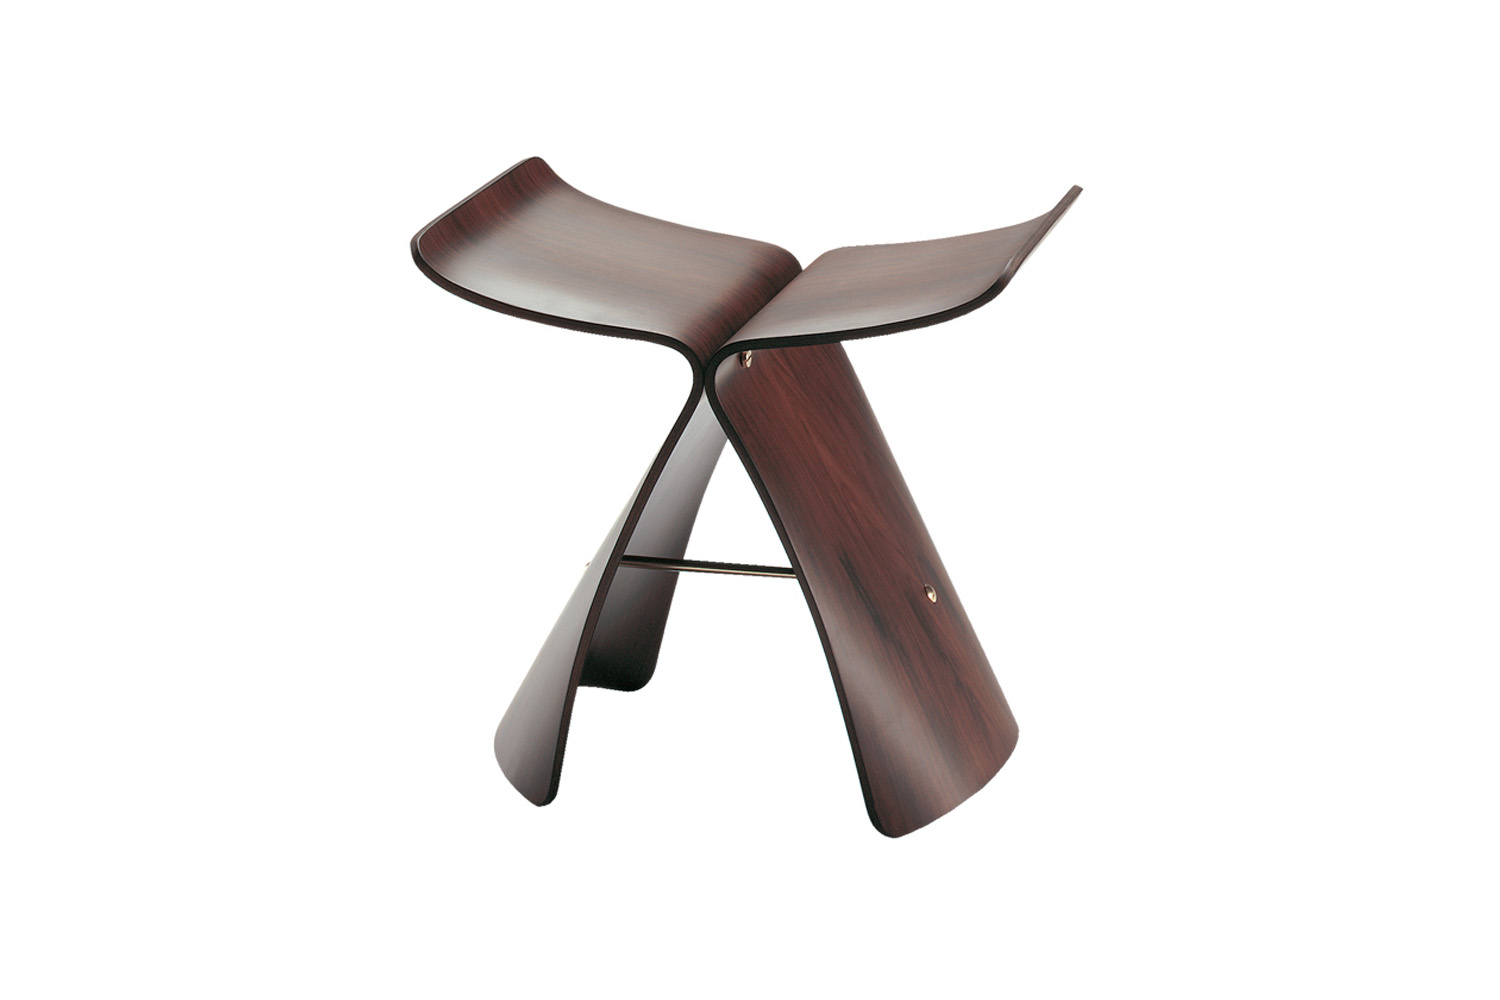 the sori yanagi butterfly stool in palisander wood is \$990 at finnish design s 13